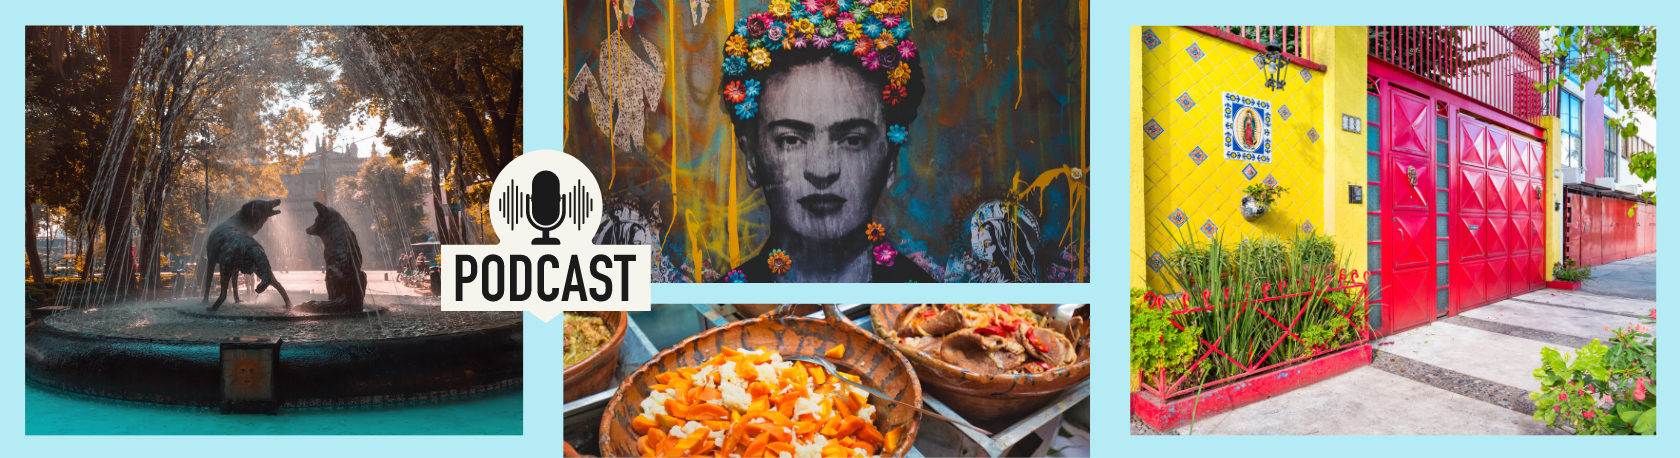 Discover the magical Mexican neighborhood of Coyoacán while improving up your Spanish listening skills - Spanish Podcast - Spanish on the Go - Easy Spanish Podcast - Learn Spanish - Speak Spanish - Easy Español